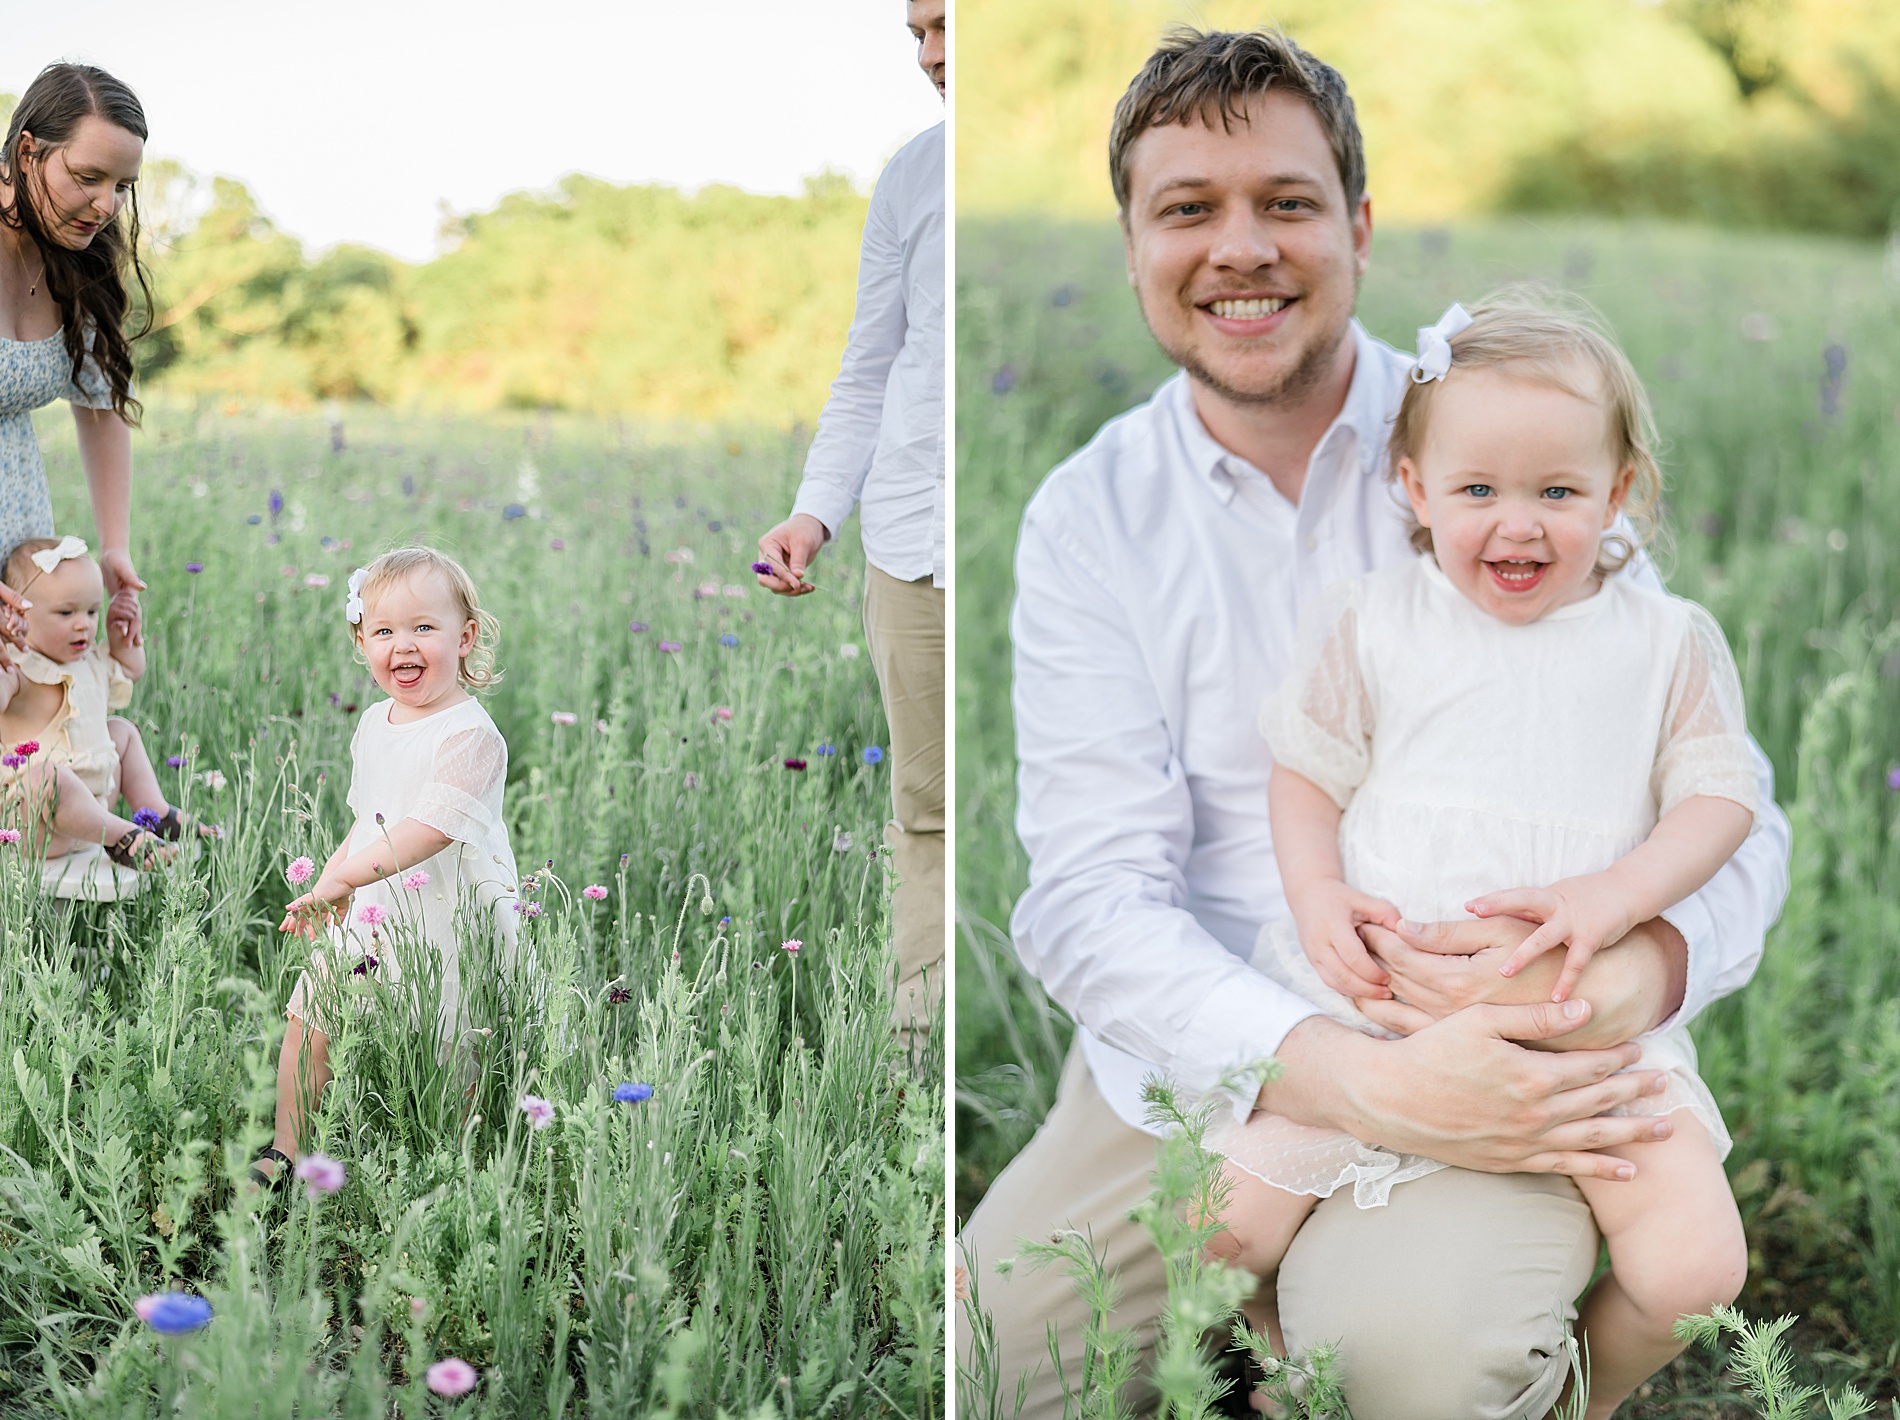 Mini Sessions vs. Full sessions | Choosing the Right Photography Experience for Your Family by Lindsey Dutton Photography, a Dallas family photographer